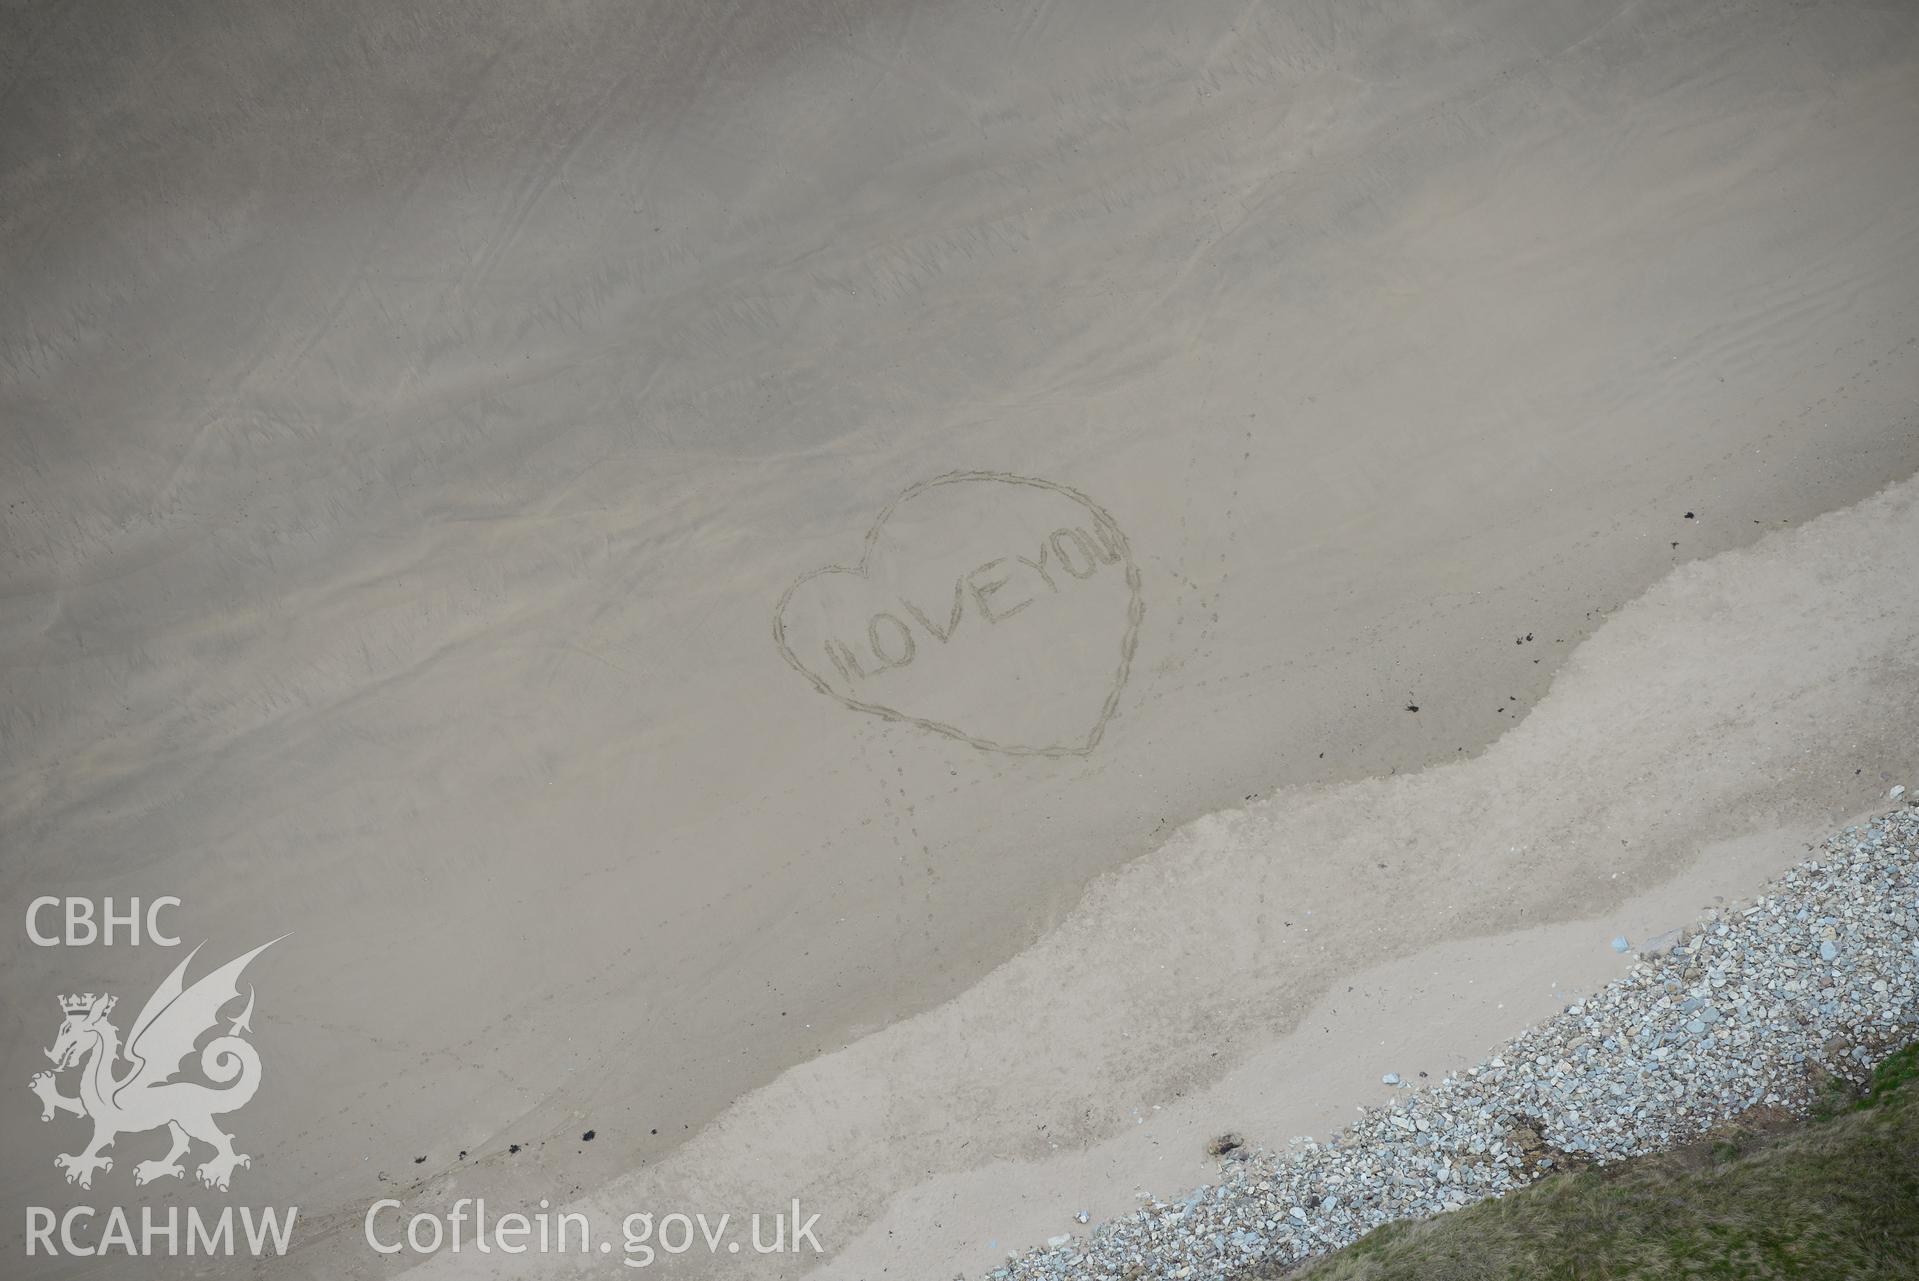 Writing in the sand at Whitesands Bay or Porth Mawr, near St. Davids. Oblique aerial photograph taken during the Royal Commission's programme of archaeological aerial reconnaissance by Toby Driver on 13th May 2015.